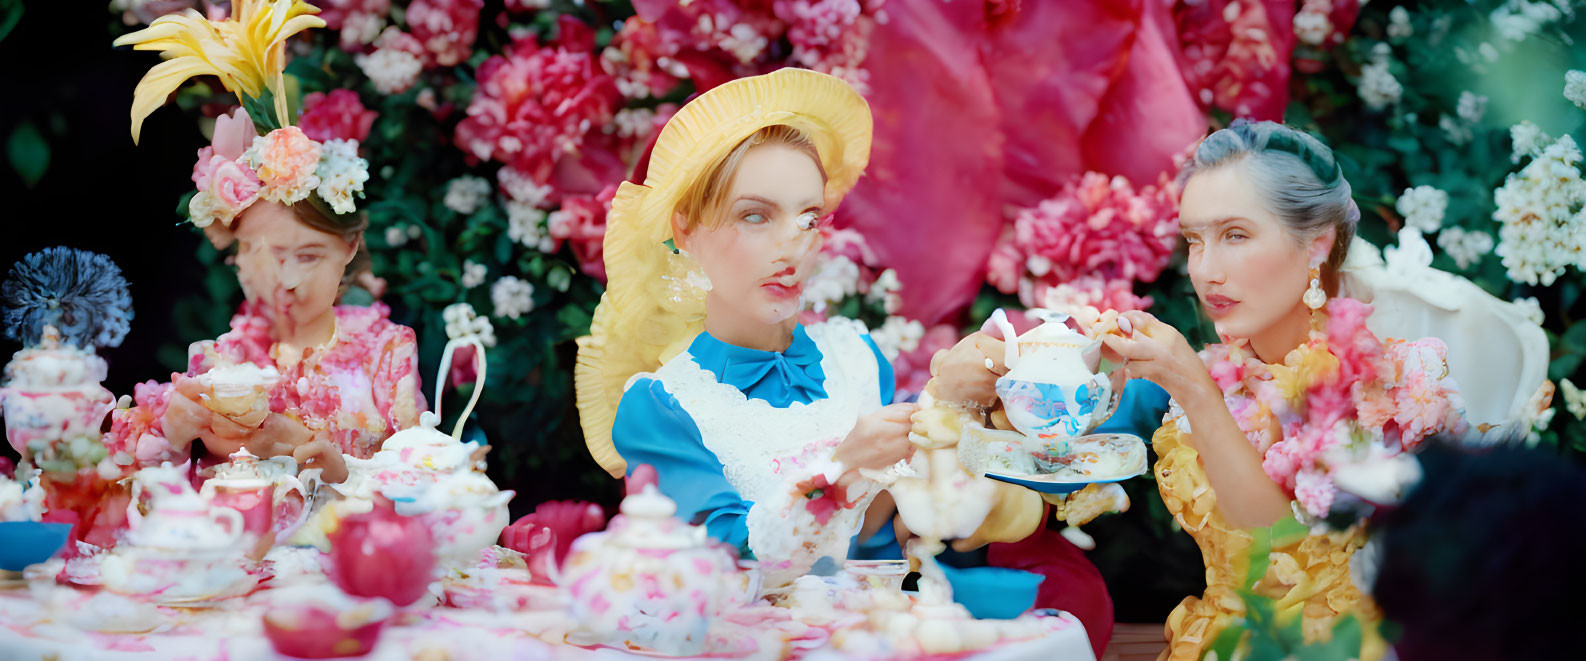 Three women in vintage dresses having tea in a floral setting